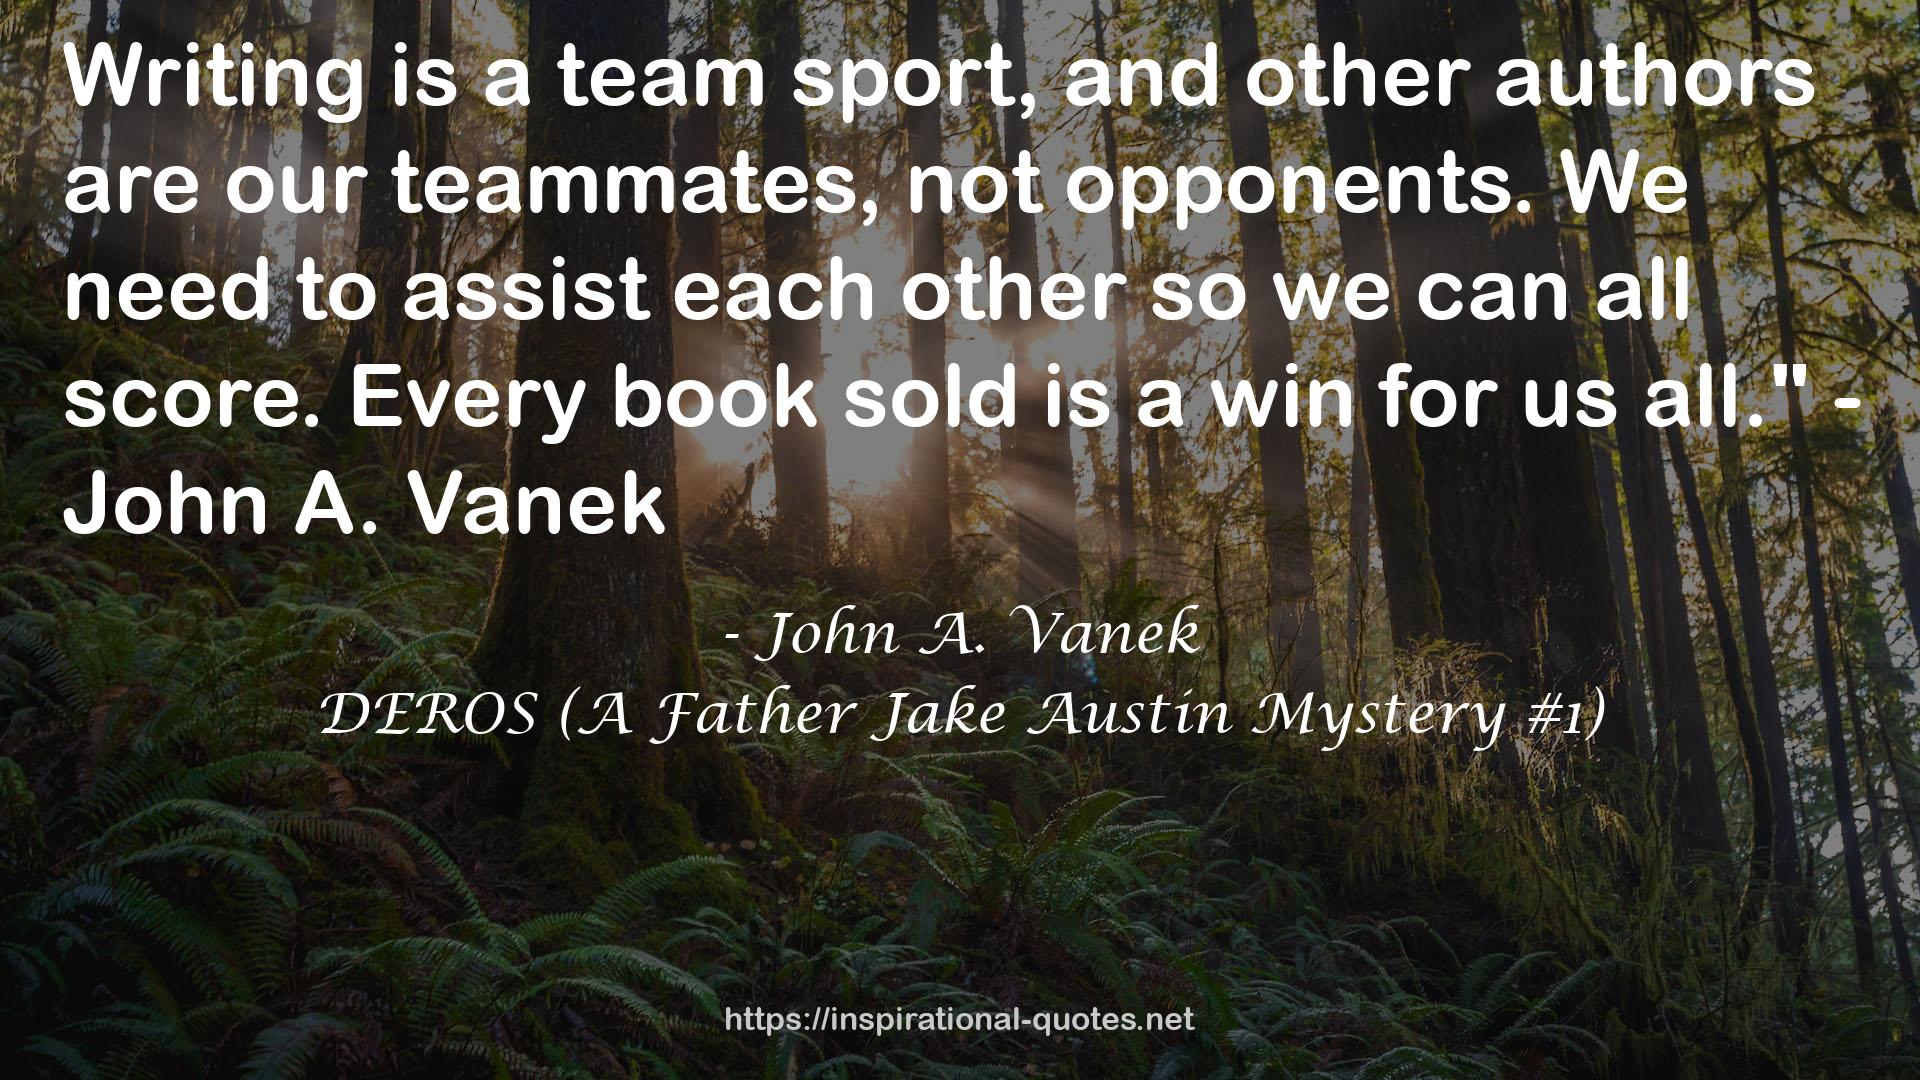 DEROS (A Father Jake Austin Mystery #1) QUOTES